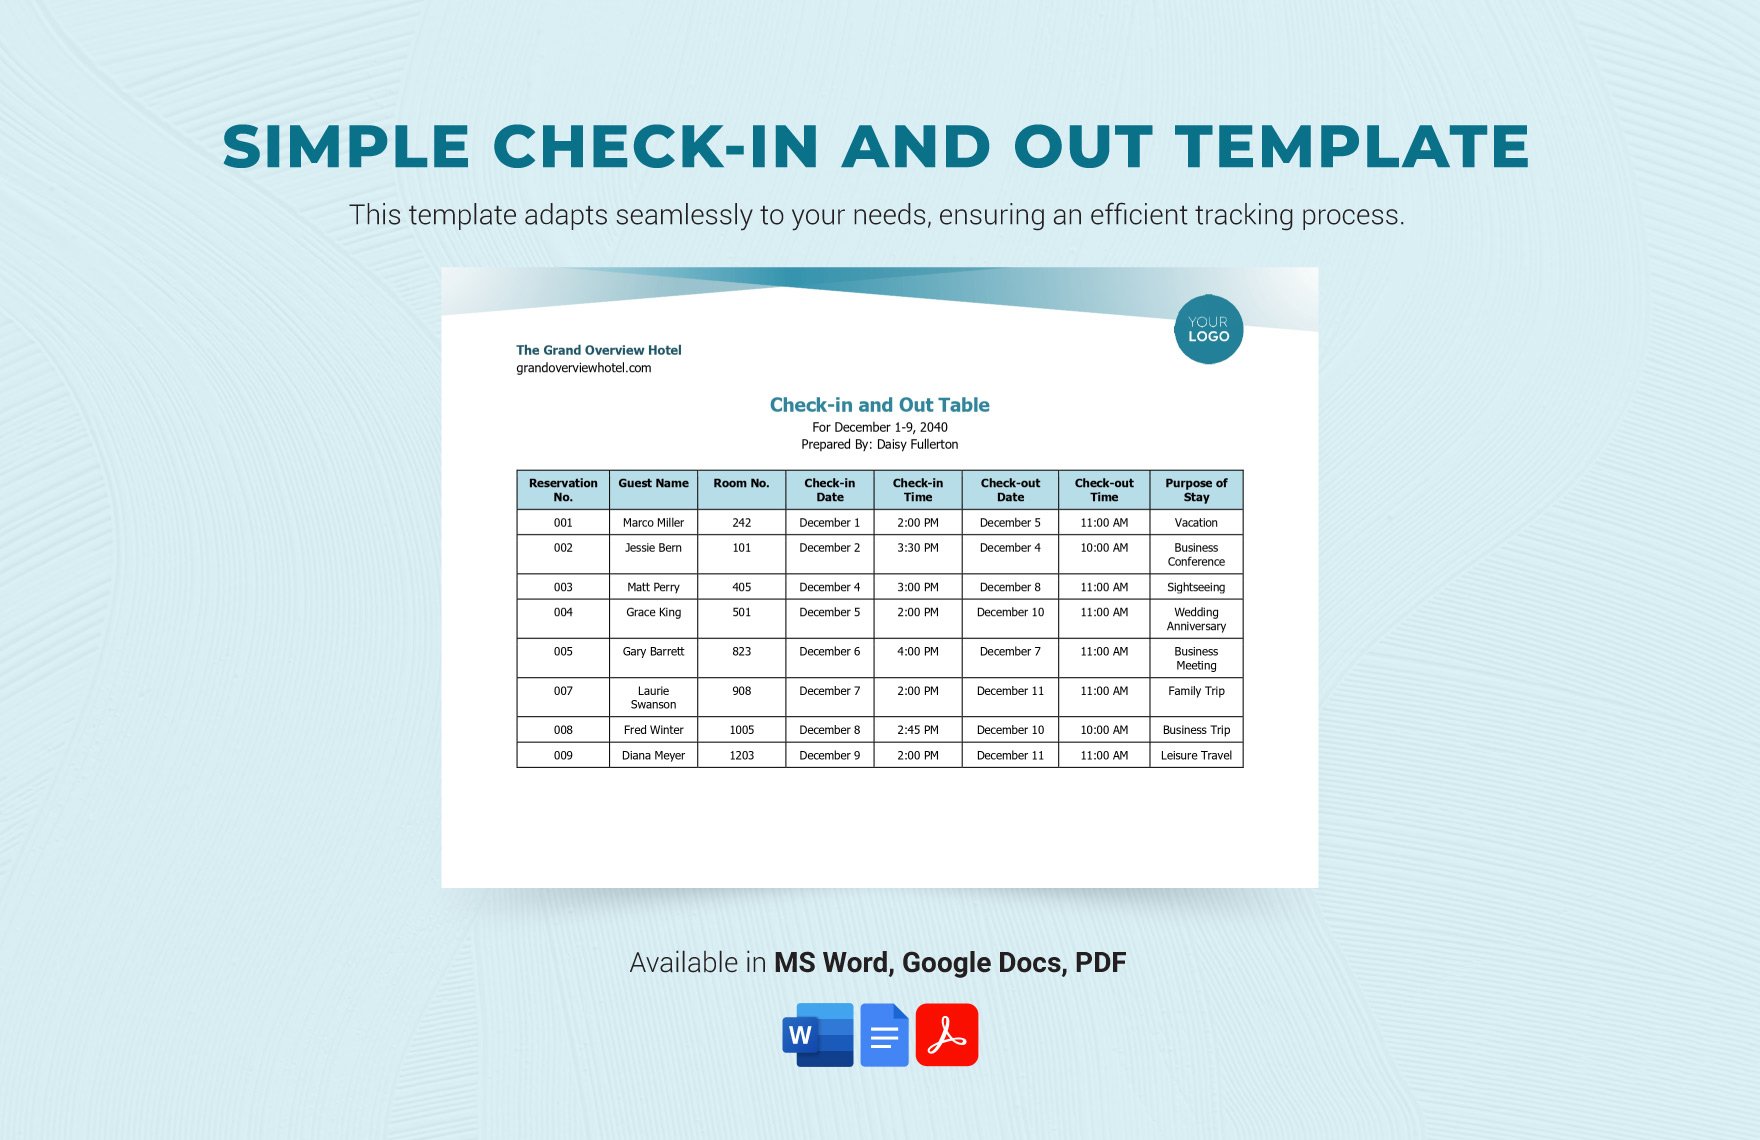 Free Simple Check-in and Out Template in Word, Google Docs, PDF